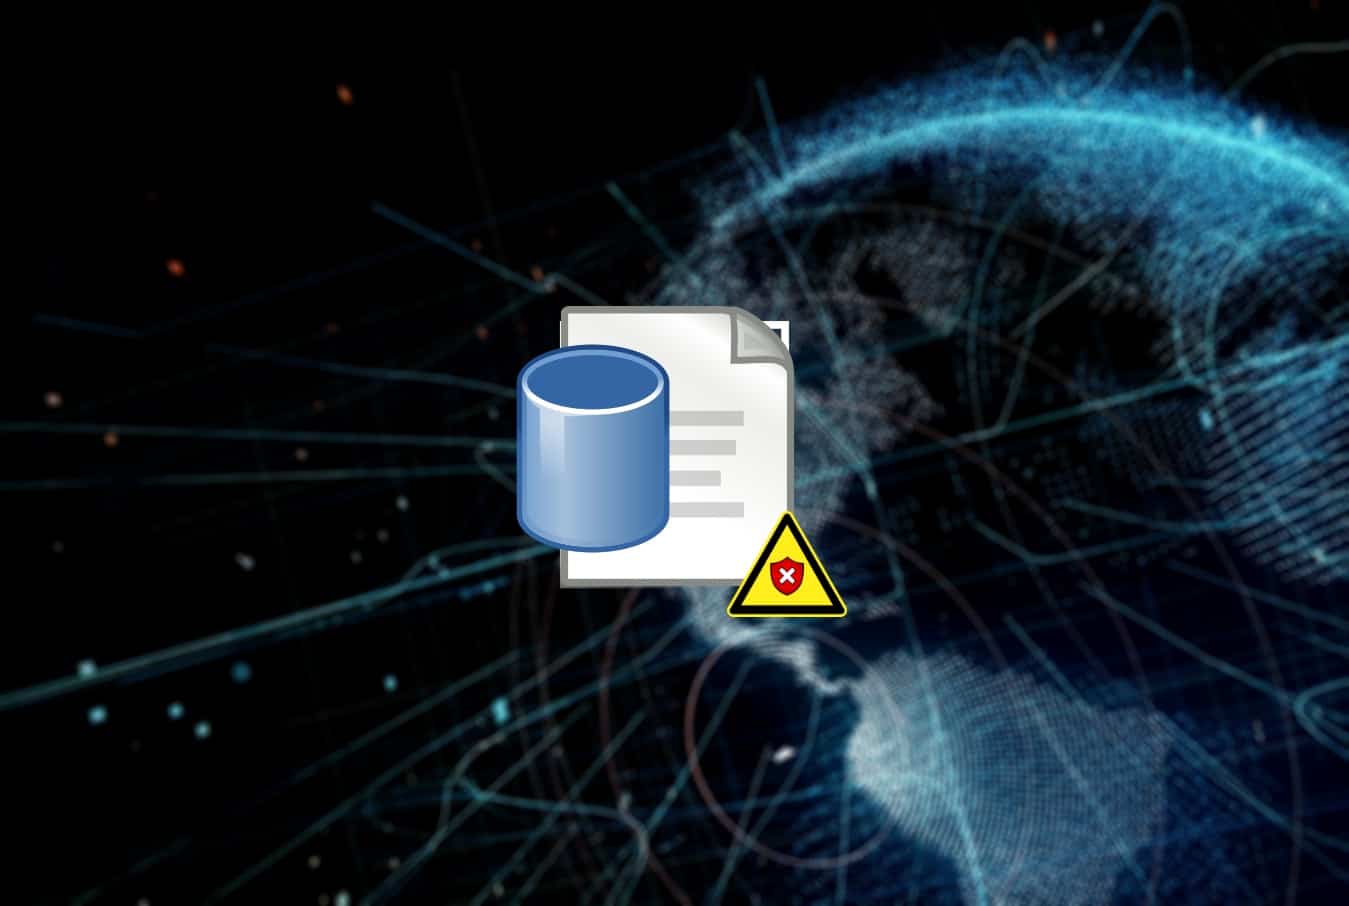 NordPass reveals more than nine thousand unsecured databases across 20 countries can be attacked effortlessly.